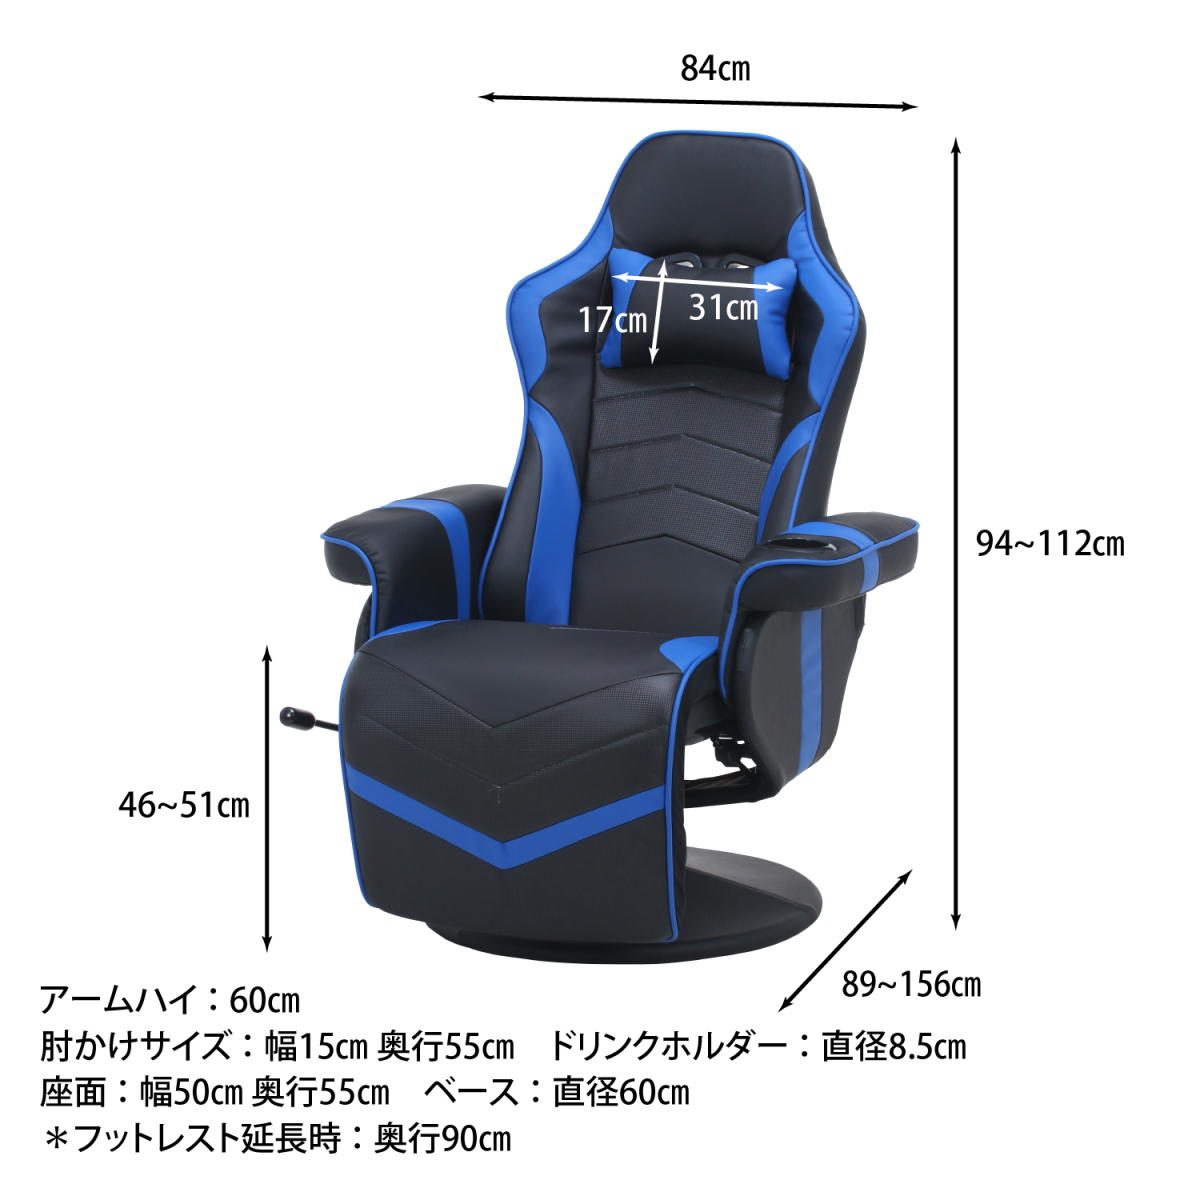  personal ge-ming chair foot less attaching black ( one part blue )[ new goods ][ free shipping ]( Hokkaido Okinawa remote island postage separately )